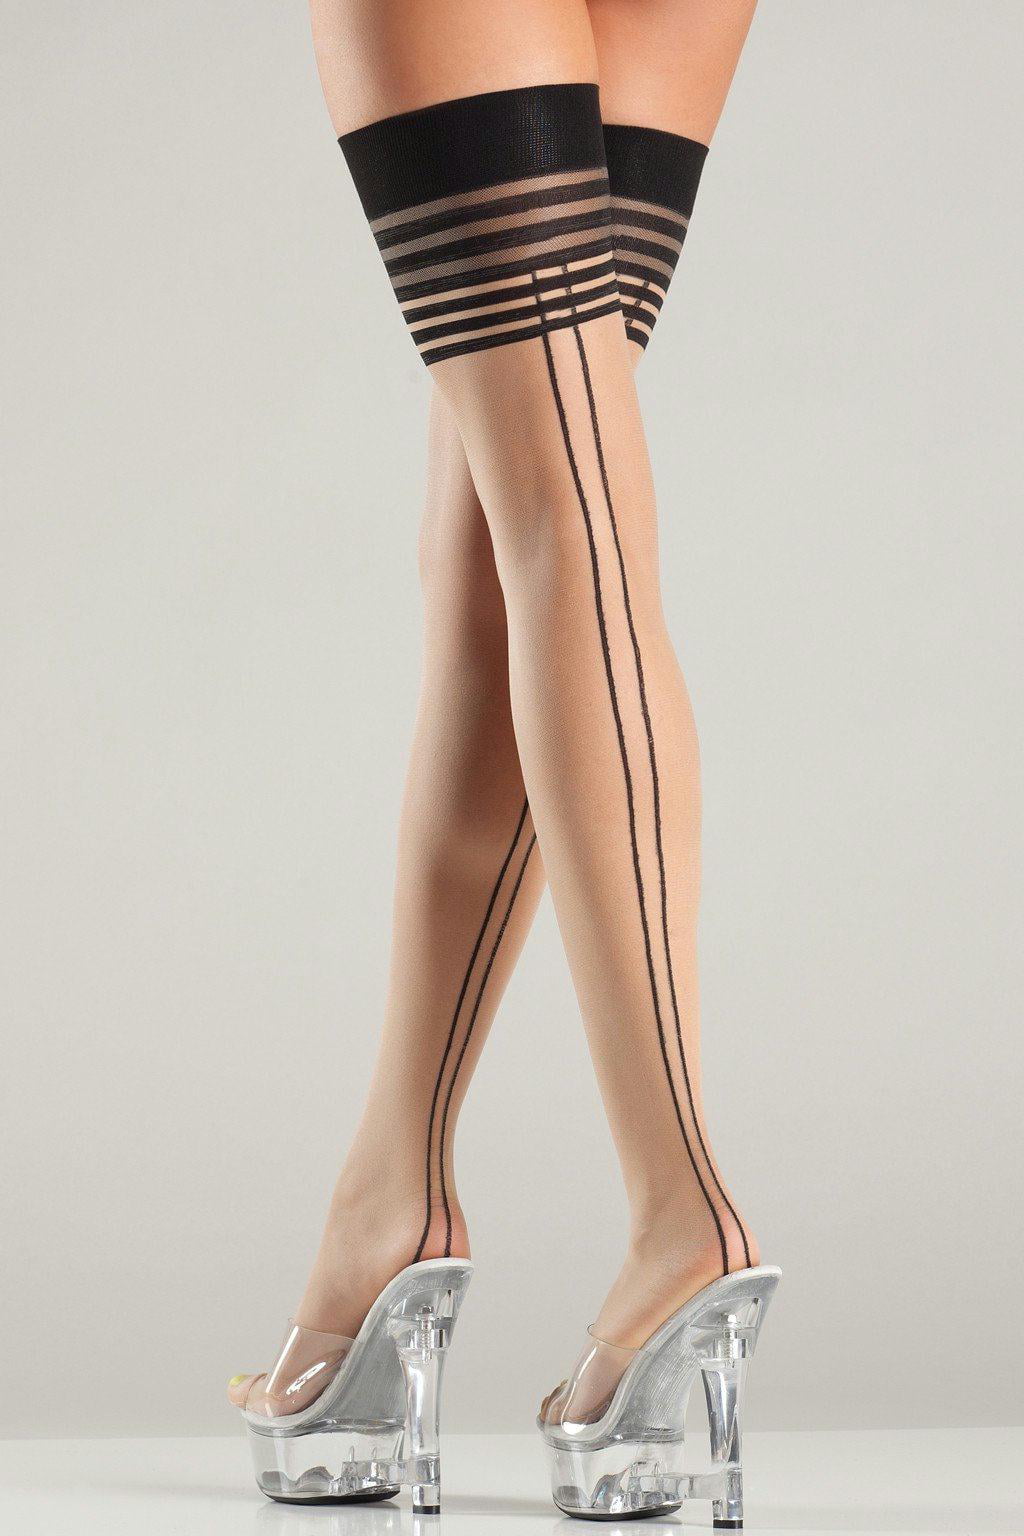 Multi Striped Top Thigh Highs Stockings Double Back Seam Costume Hosiery BW712 